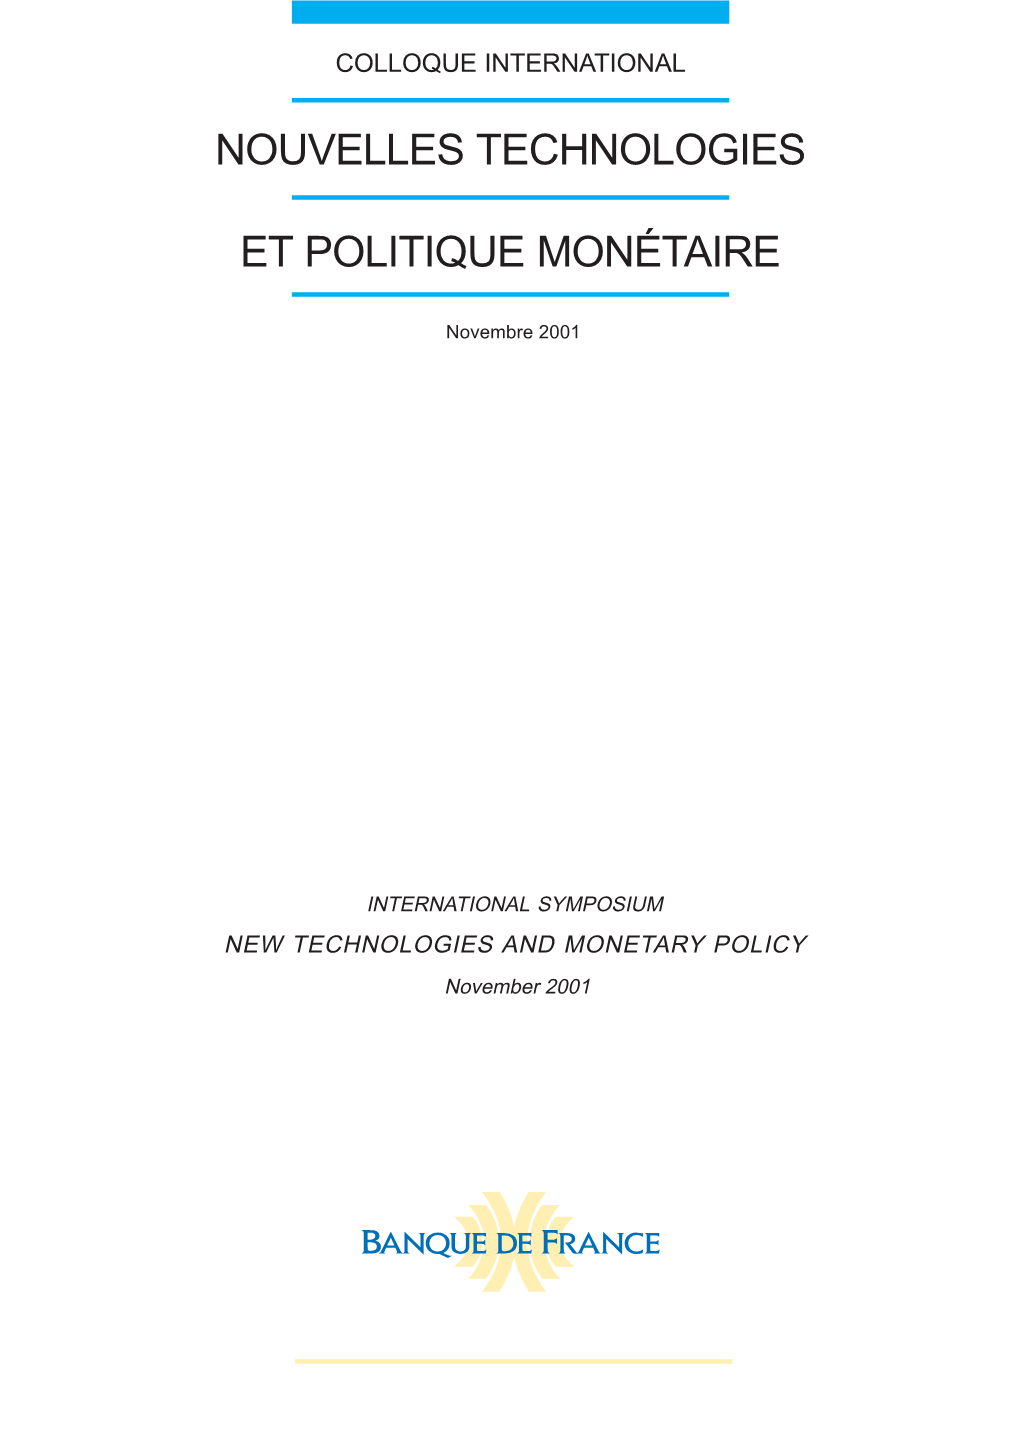 NEW TECHNOLOGIES and MONETARY POLICY November 2001 Preface